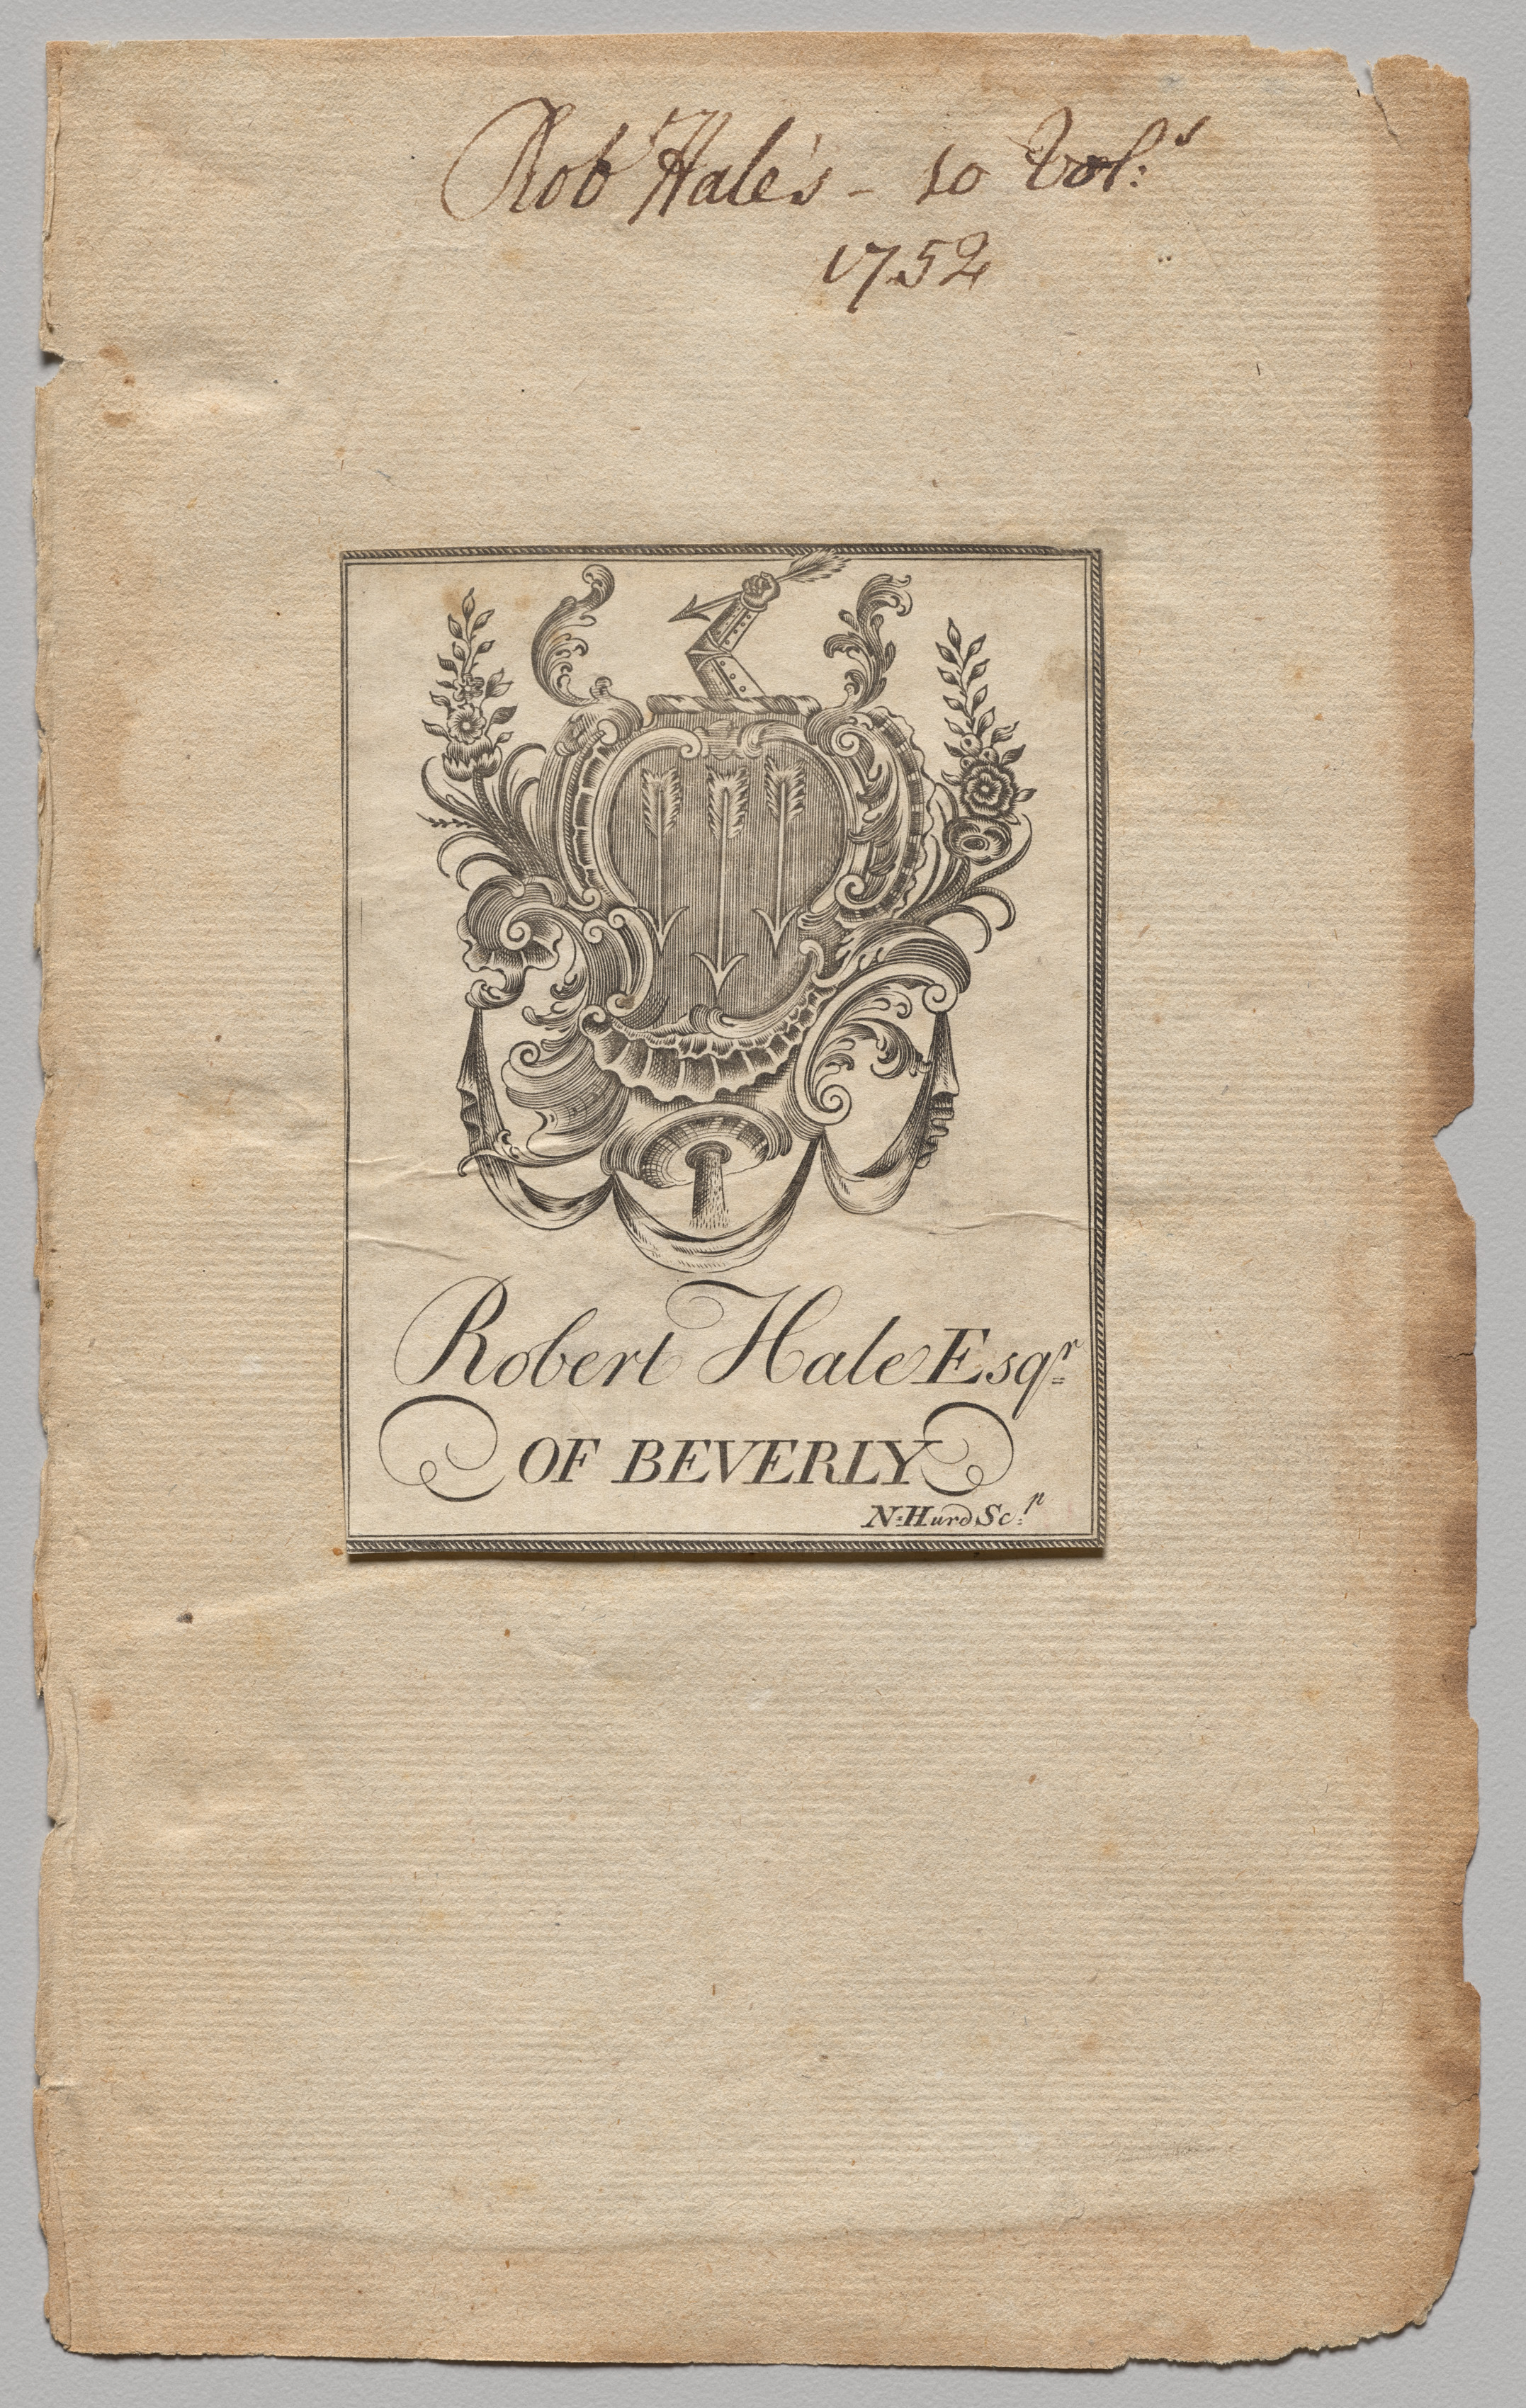 Bookplate:  Coat of Arms with Robert Hale, Esq. inscribed